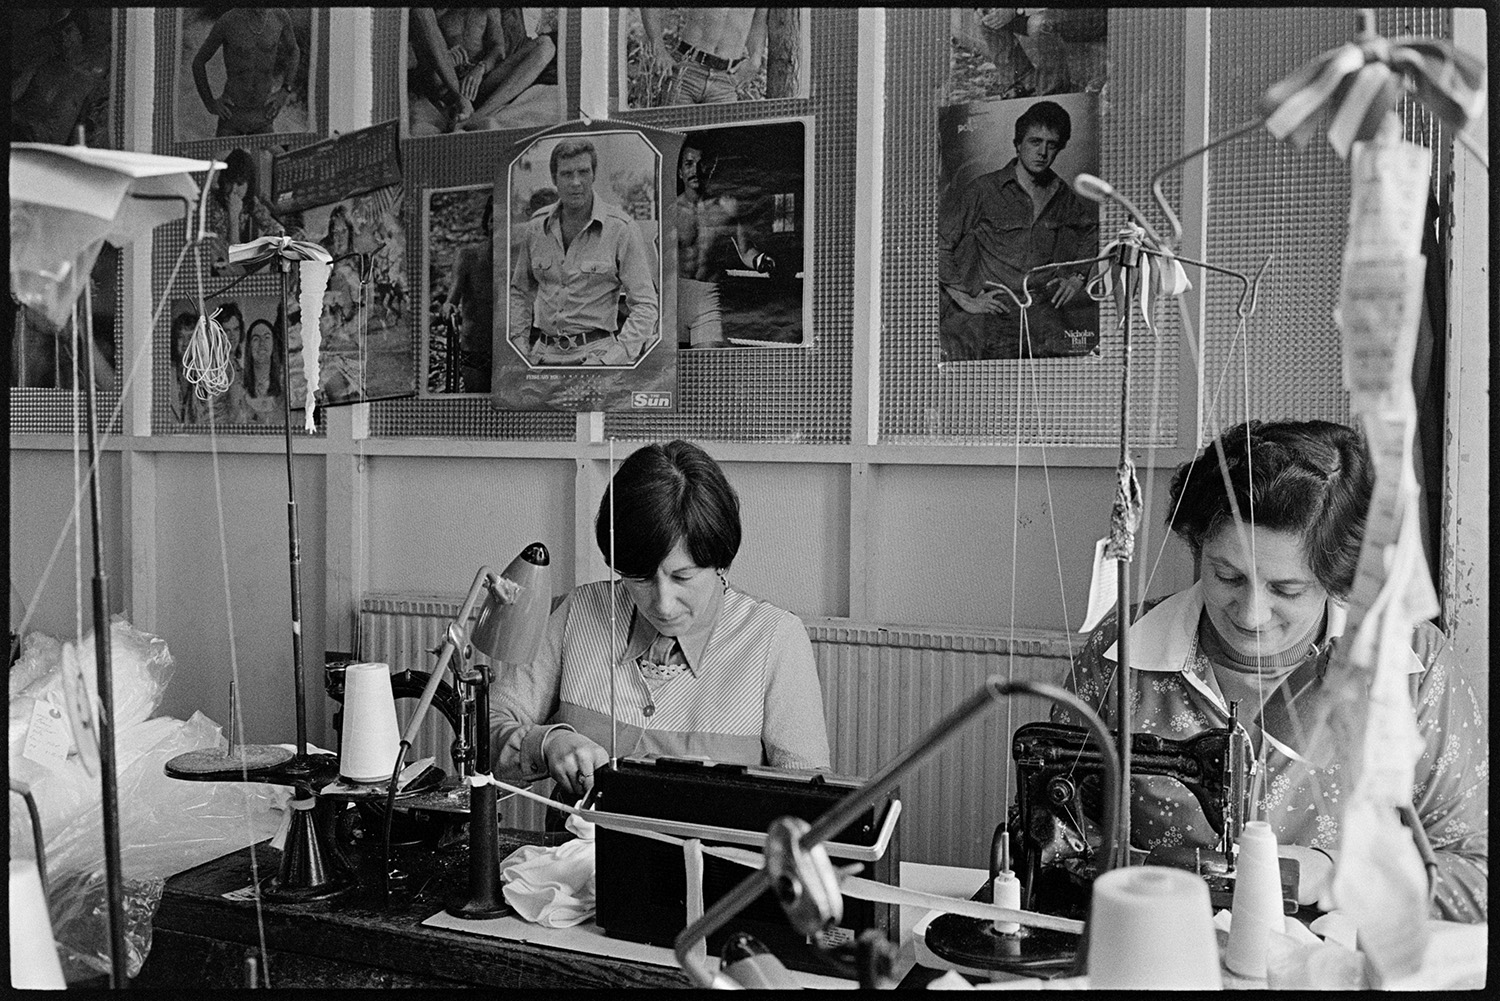 Workers in glove factory. Machinery. Pin-ups!
[Women working at sewing machines at Vaughans Glove Factory, Halsdon Terrace, Torrington with posters on the wall behind them.]